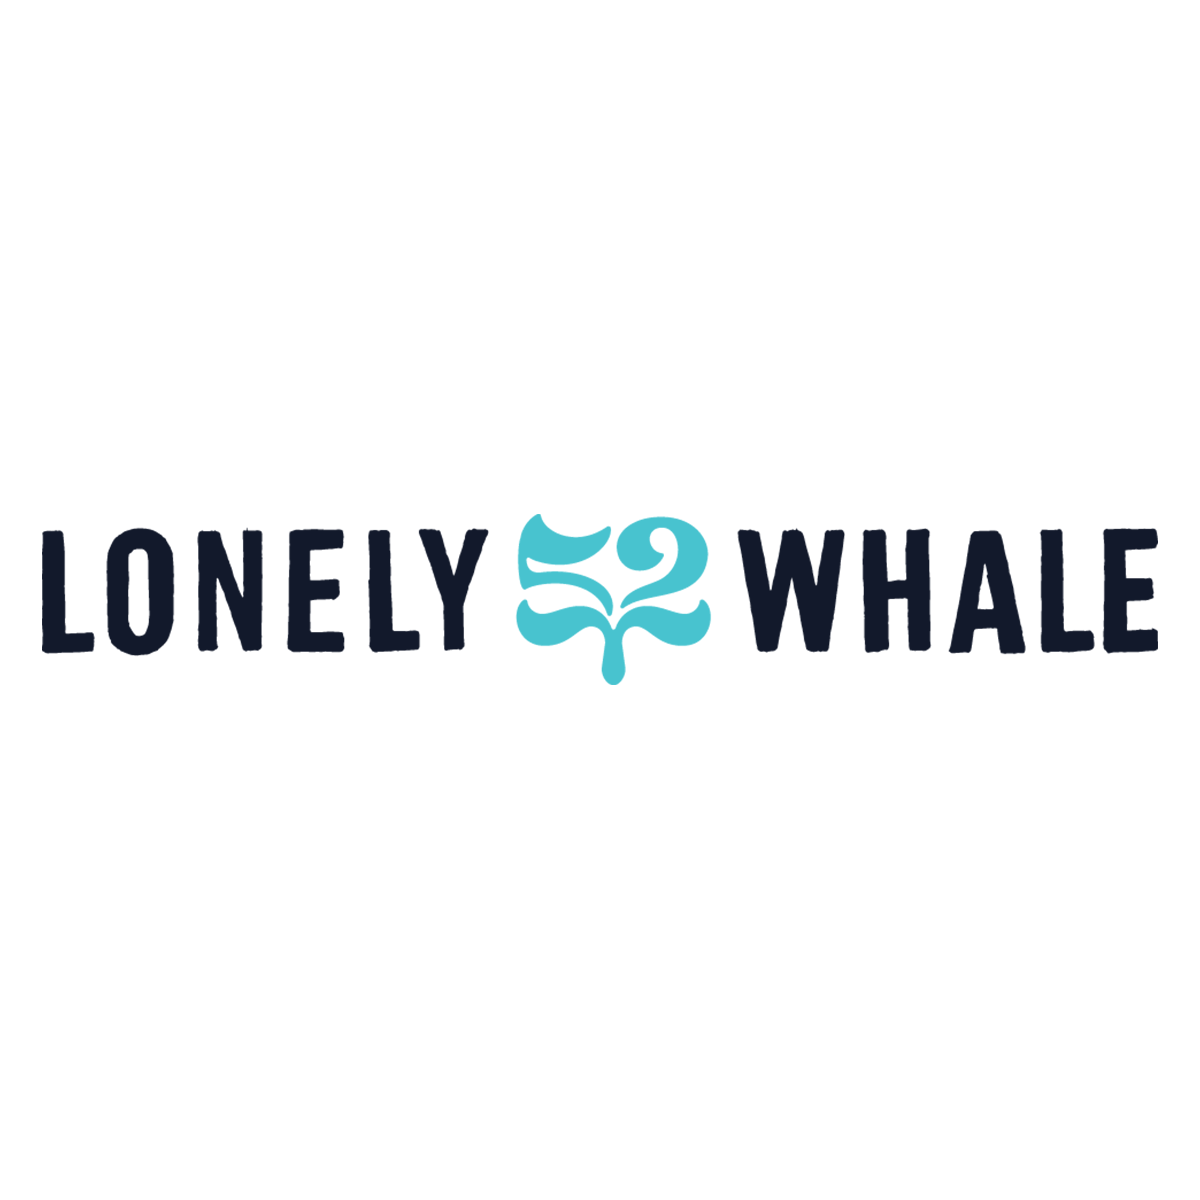 Lonely whale